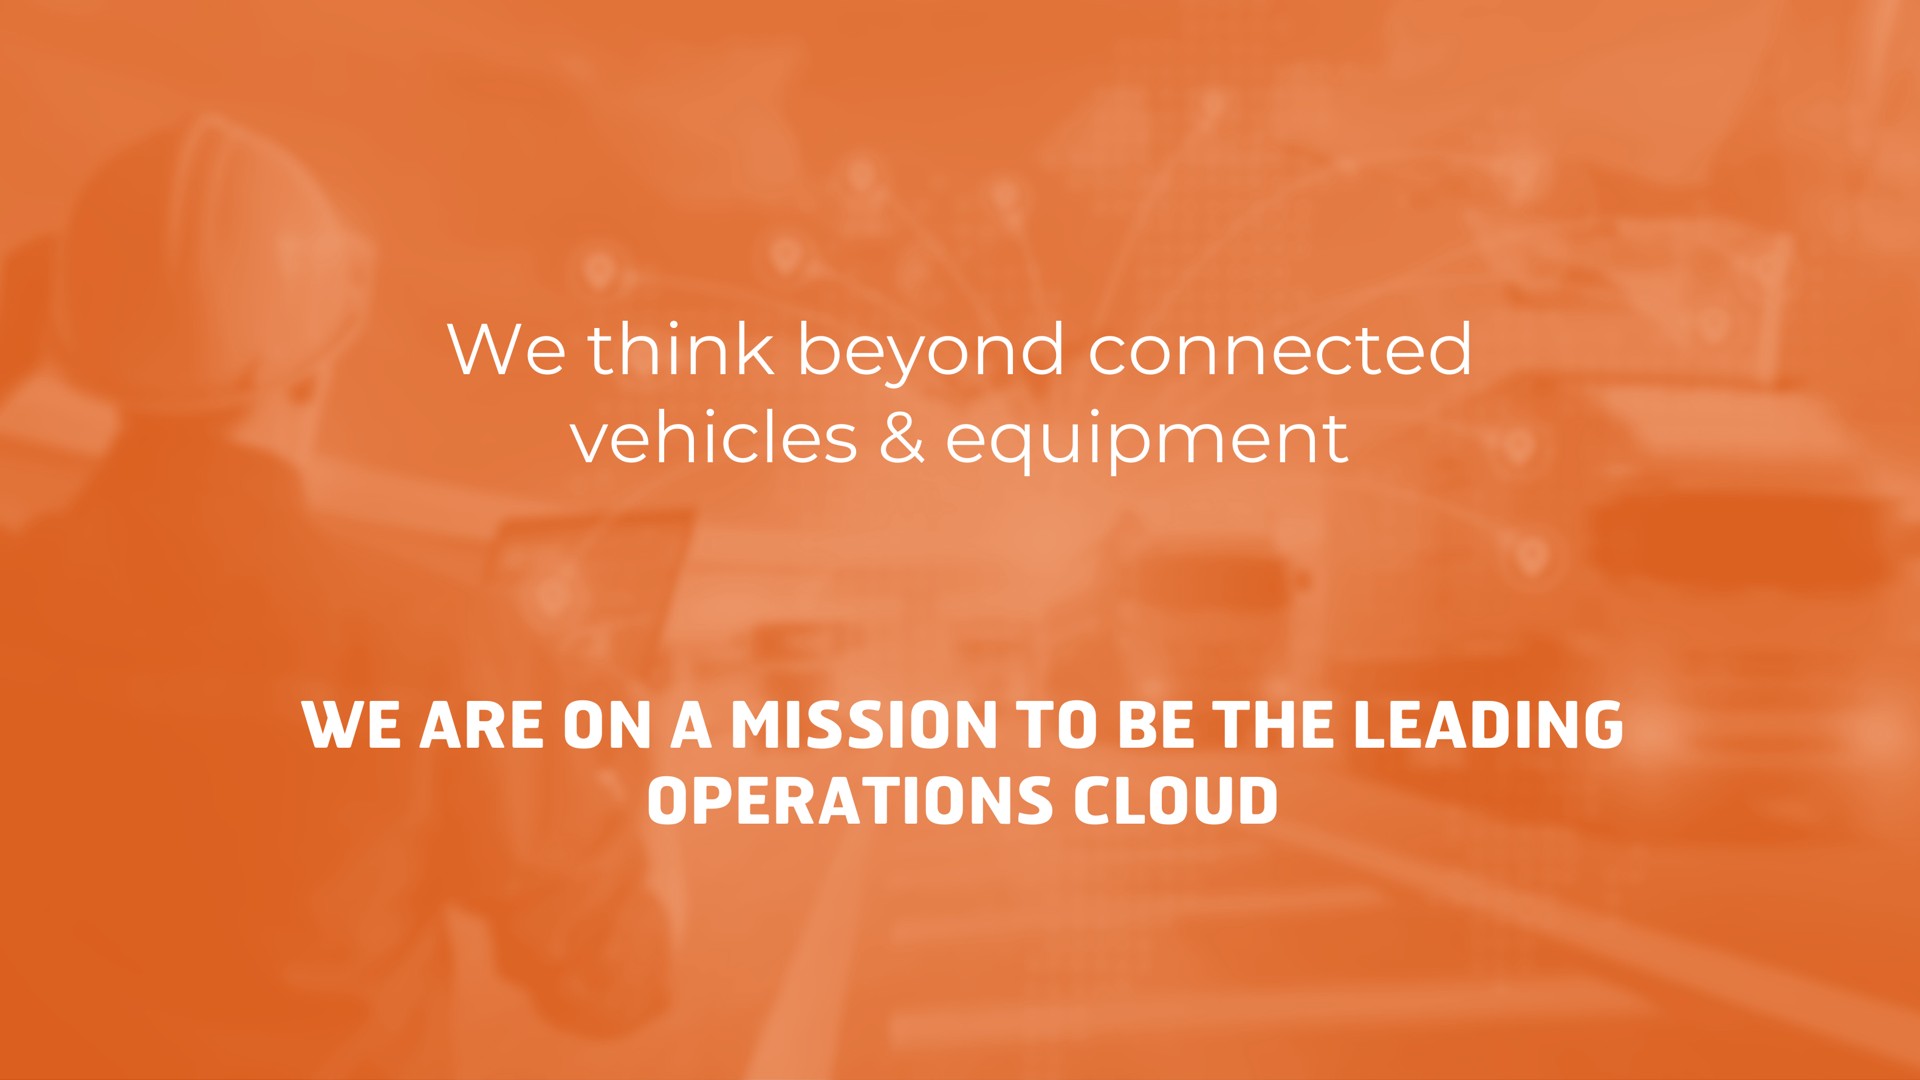 we think beyond connected vehicles equipment we are on a mission to be the leading operations cloud | Karooooo